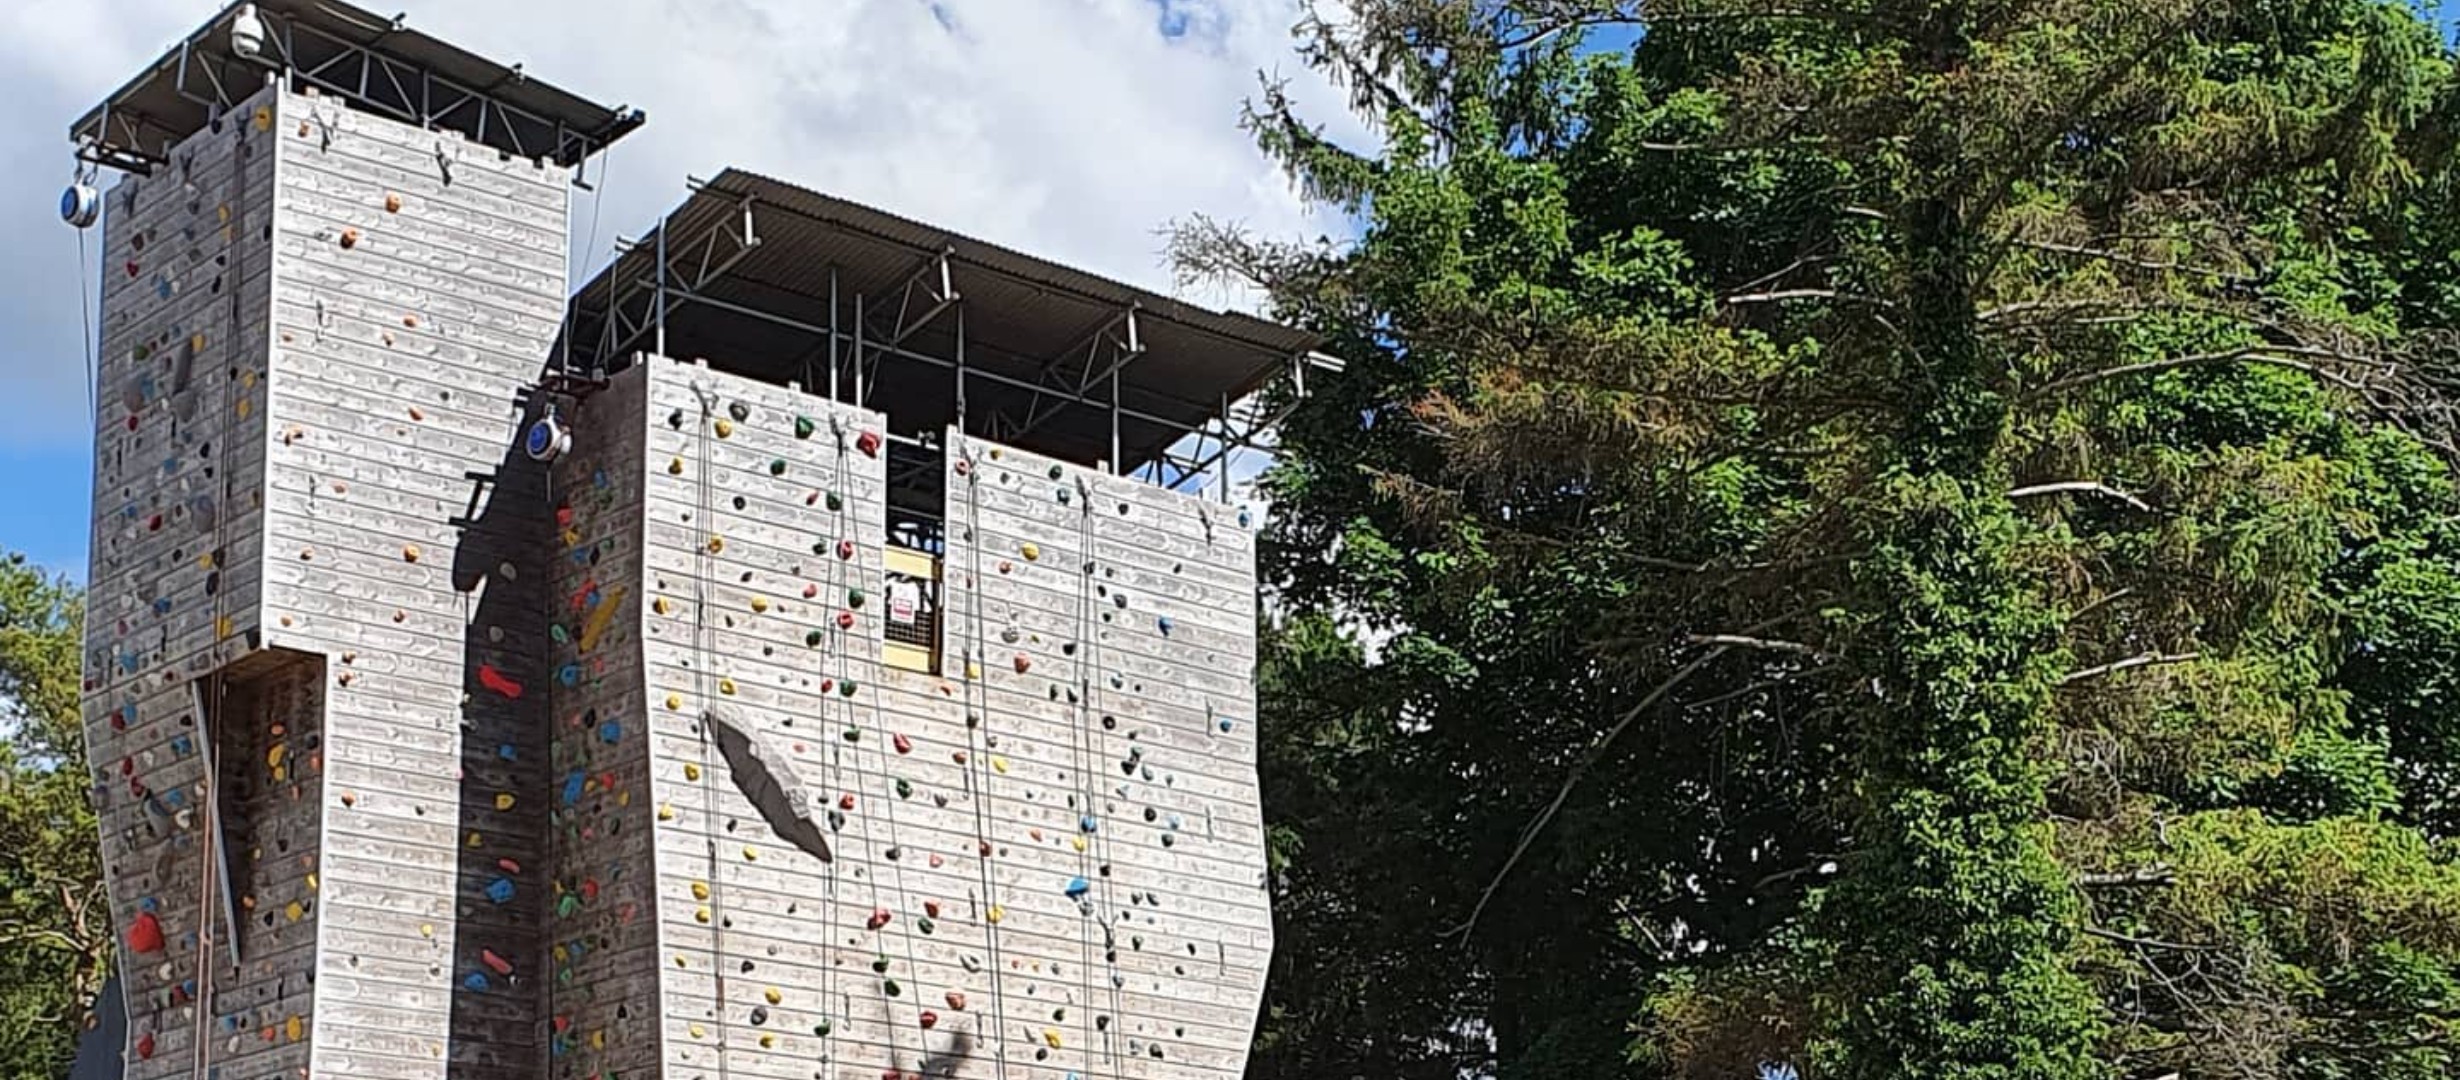 two climbing walls outside by trees